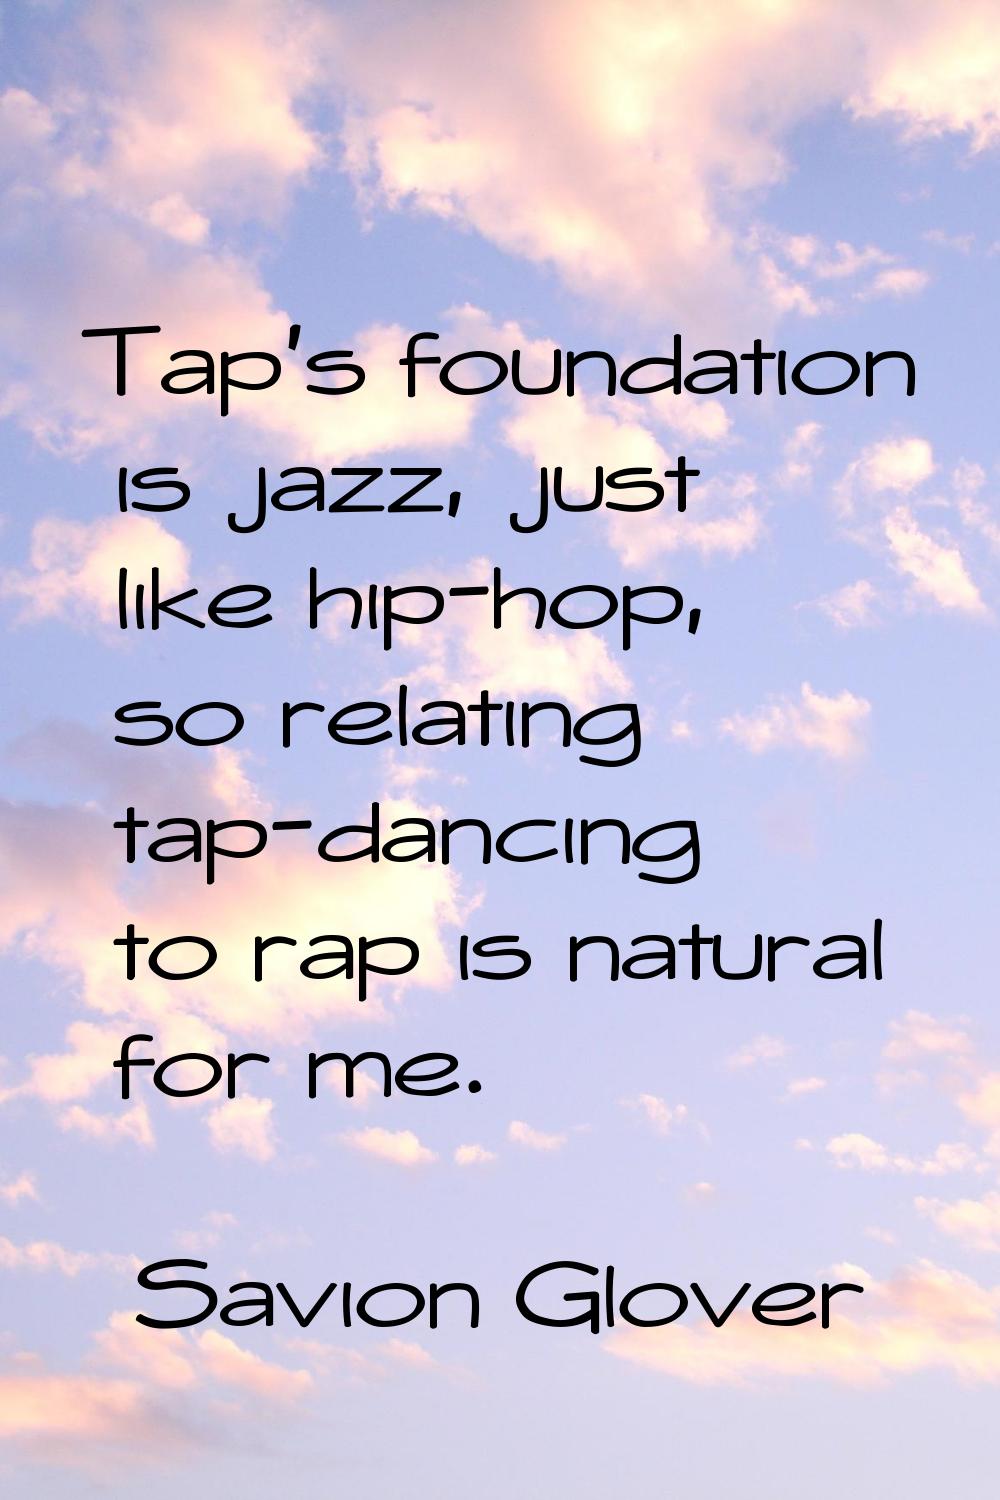 Tap's foundation is jazz, just like hip-hop, so relating tap-dancing to rap is natural for me.